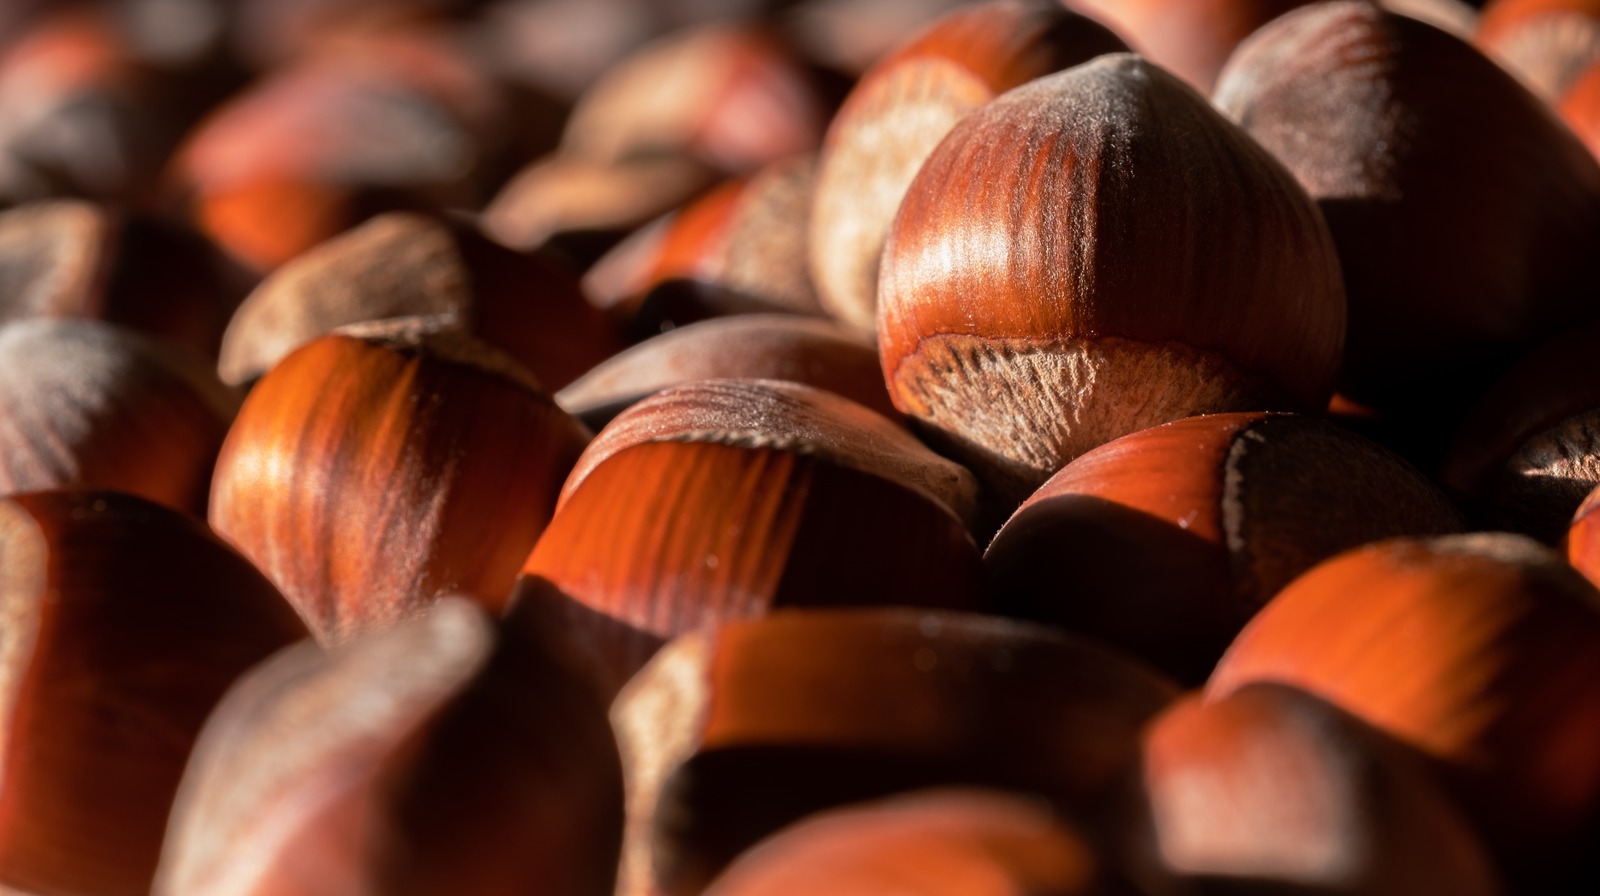 The Bizarre Way Hazelnuts Were Once Used To Find A Spouse On Halloween